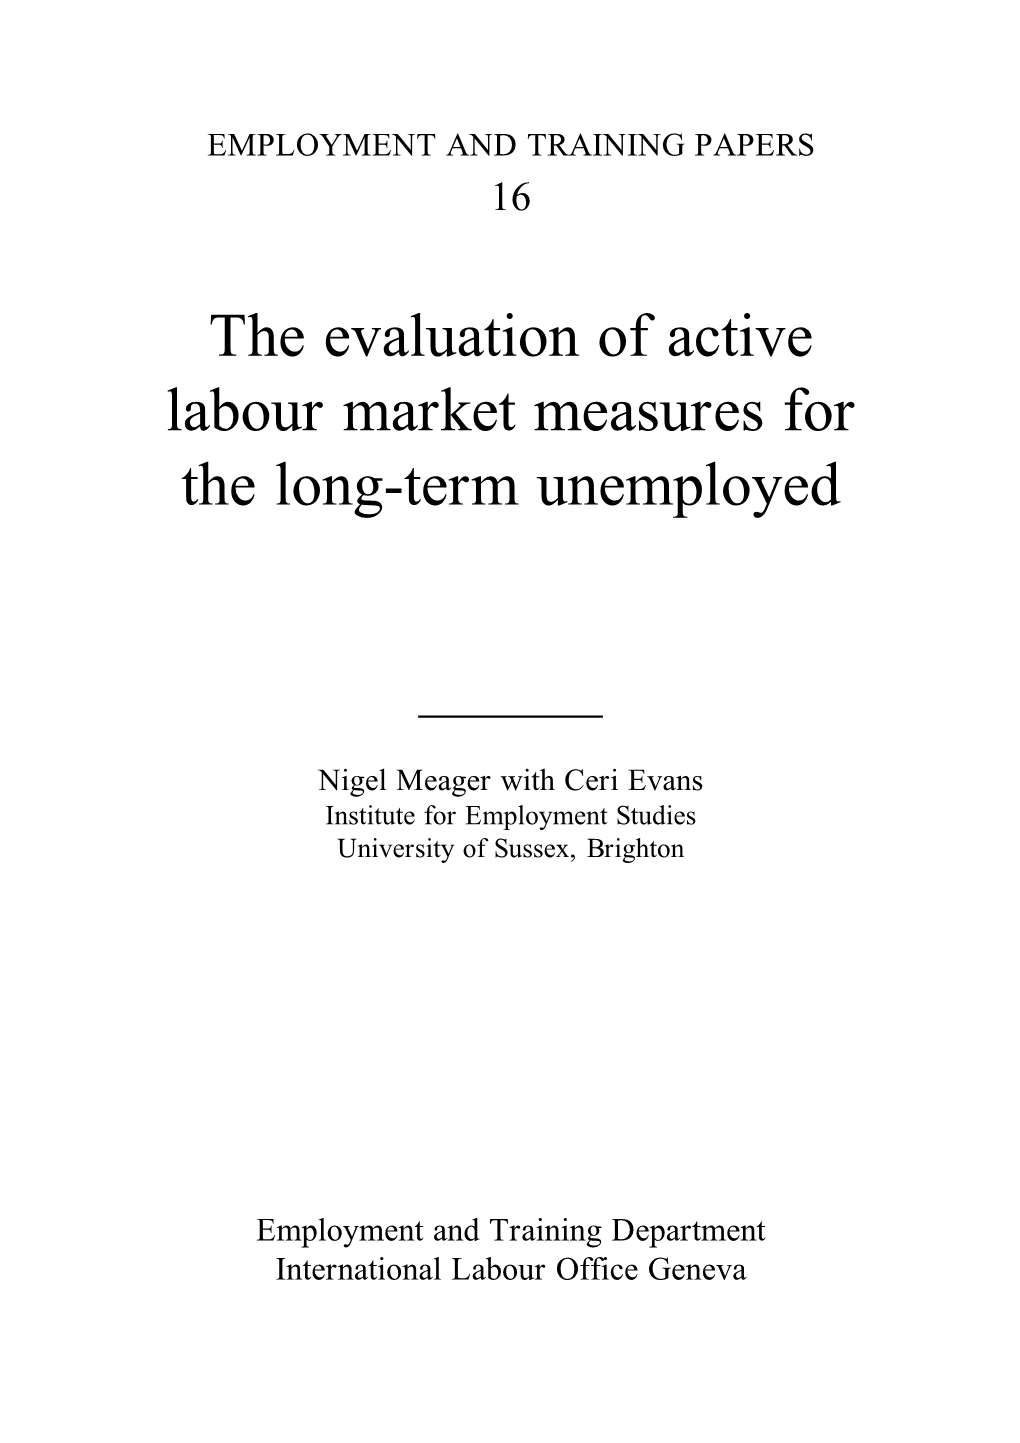 The Evaluation of Active Labour Market Measures for the Long-Term Unemployed